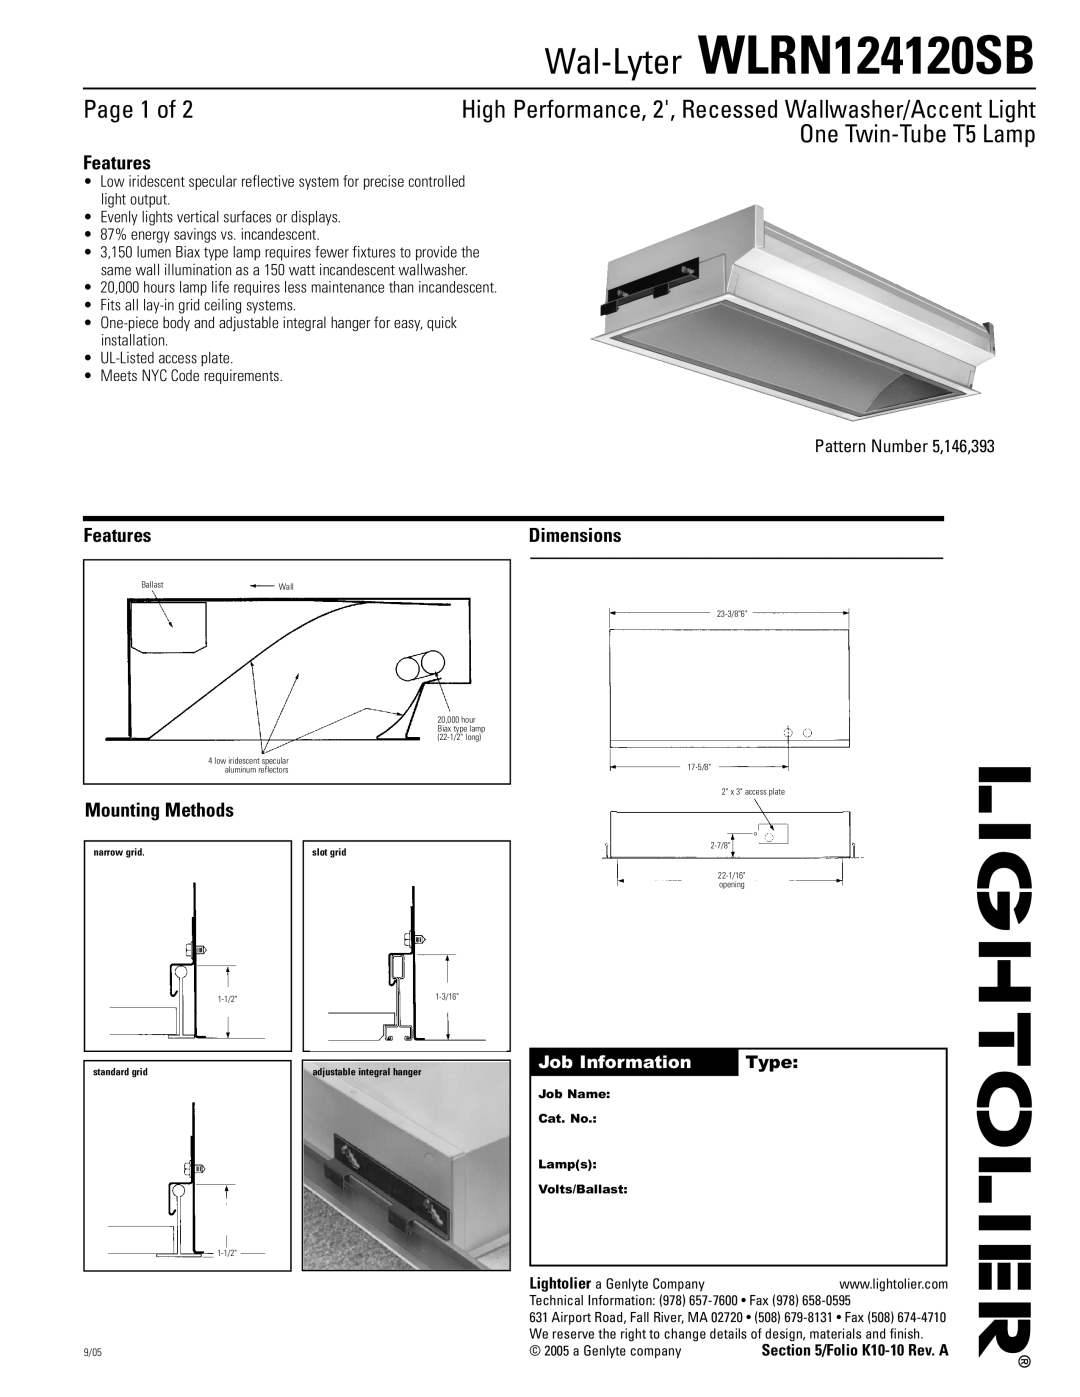 Lightolier WLRN124120SB dimensions Page 1 of, One Twin-TubeT5 Lamp, Features, Mounting Methods, Dimensions, Type 